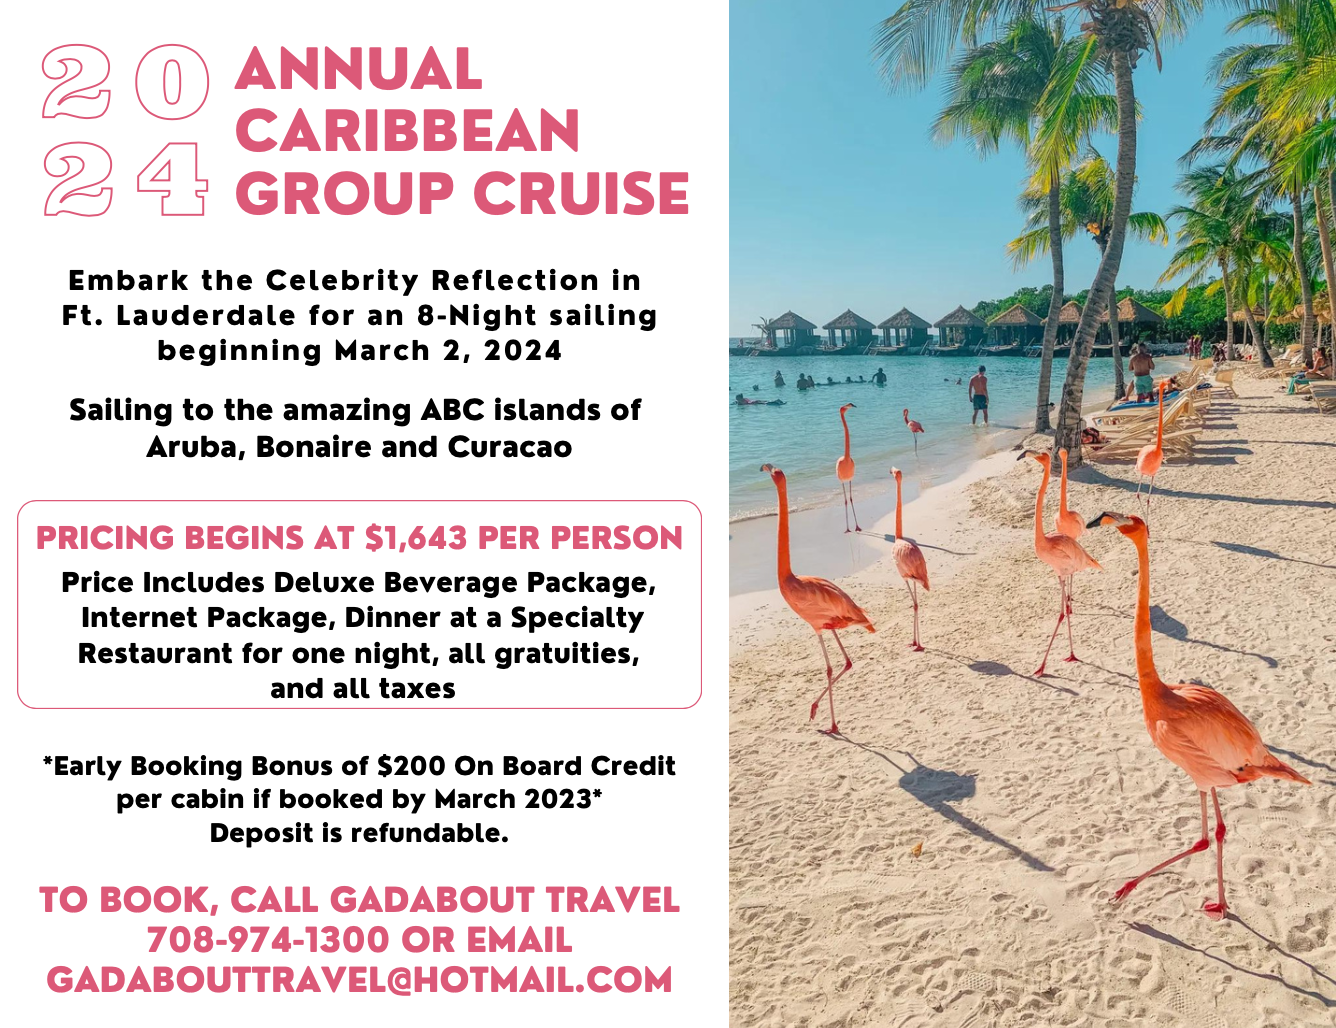 Our 2024 Caribbean Group Cruise is Headed to the ABC Islands